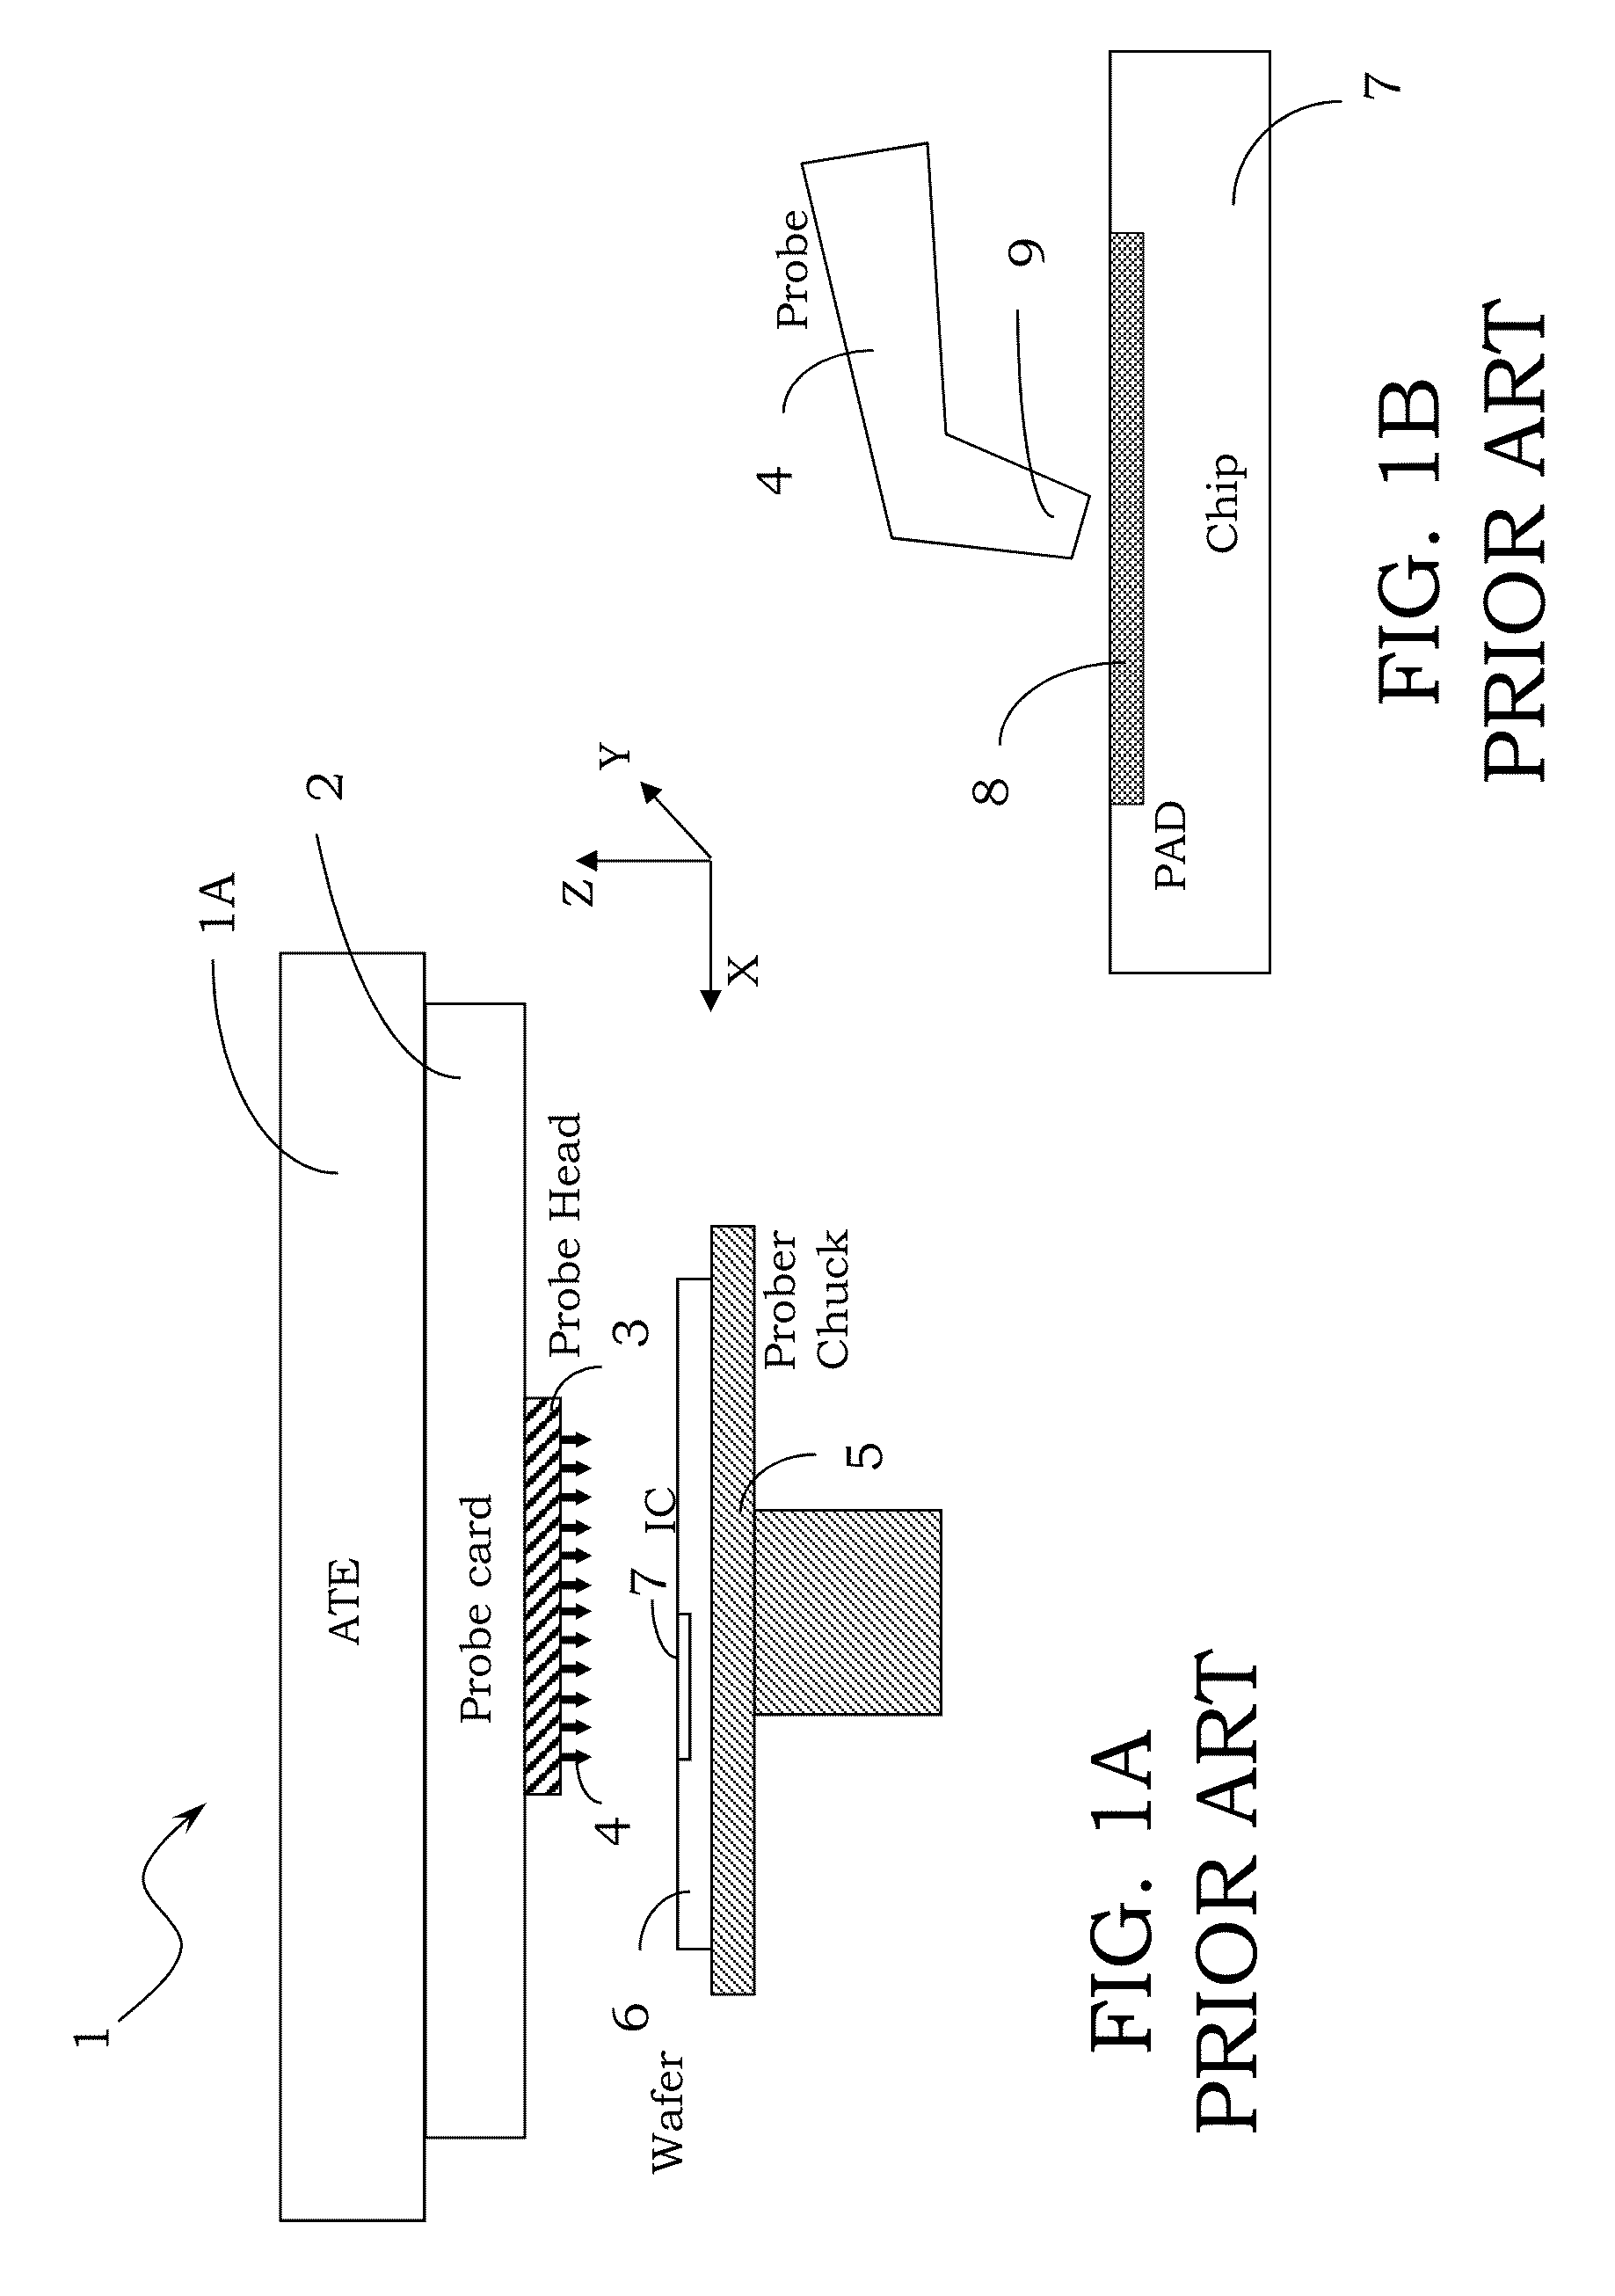 Integrated circuit comprising at least an integrated antenna